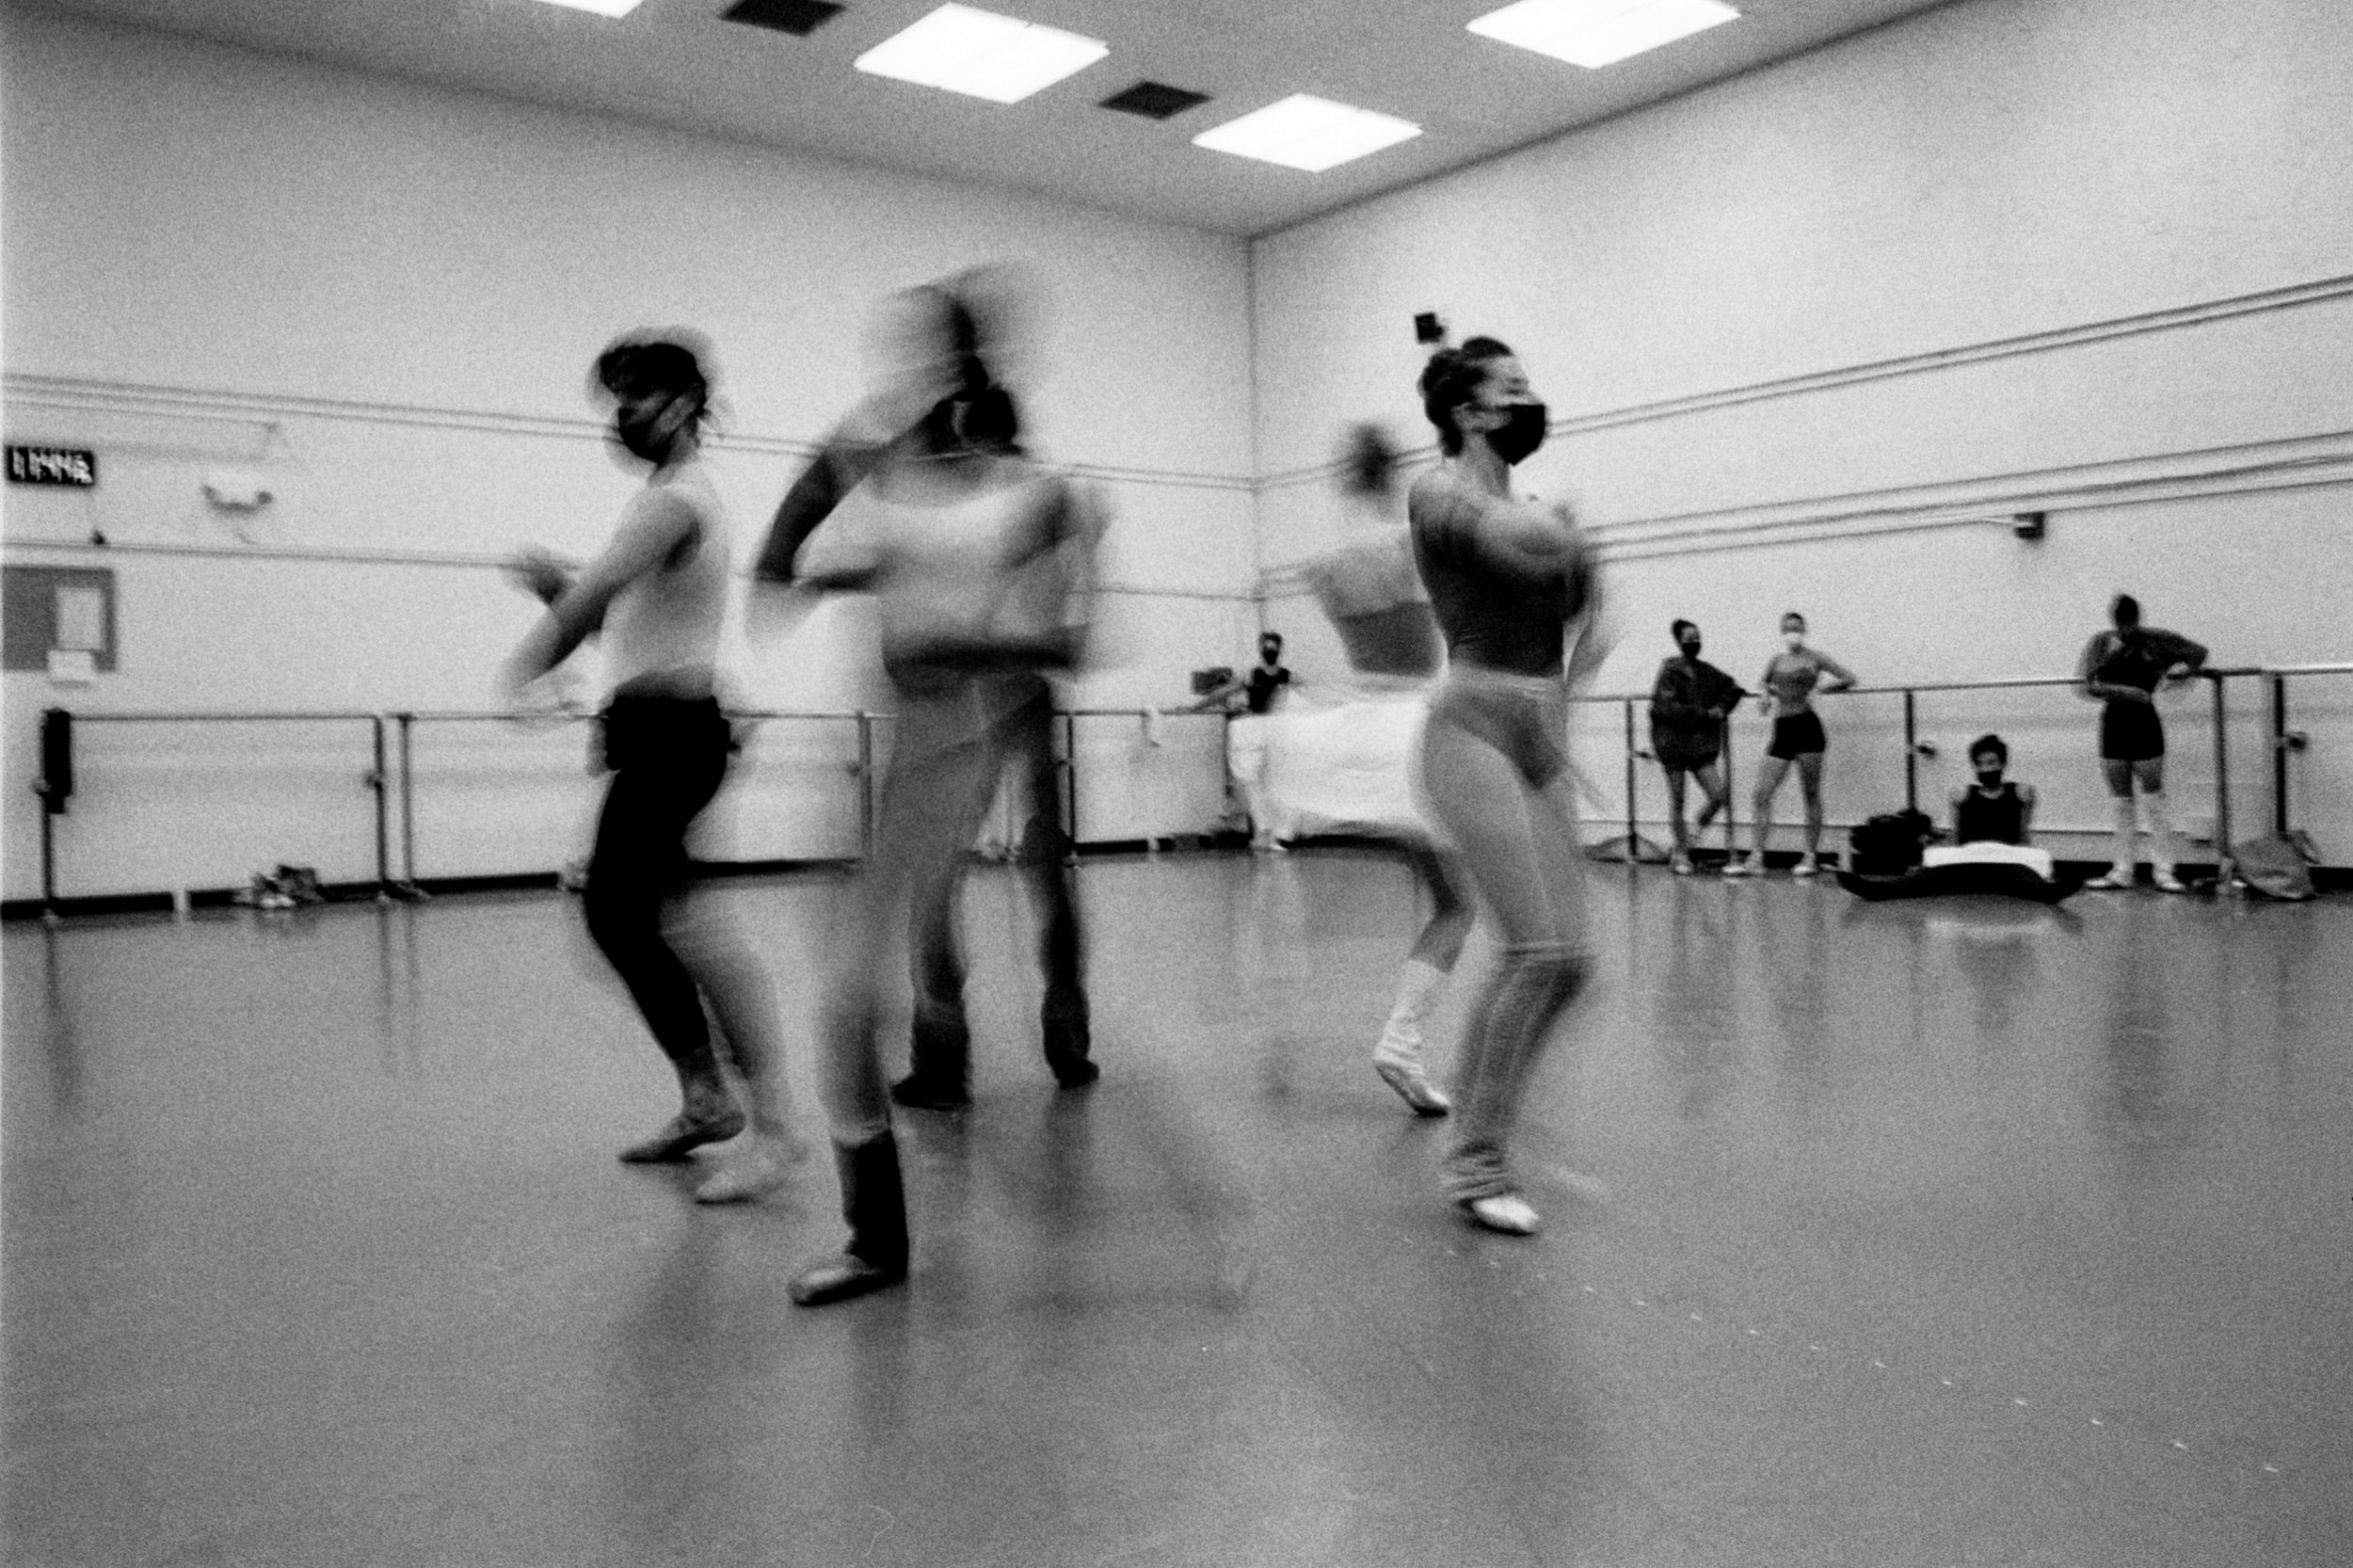  Dancers of the New York City Ballet rehearsing  Play Time //  by Brock Stillmunks 